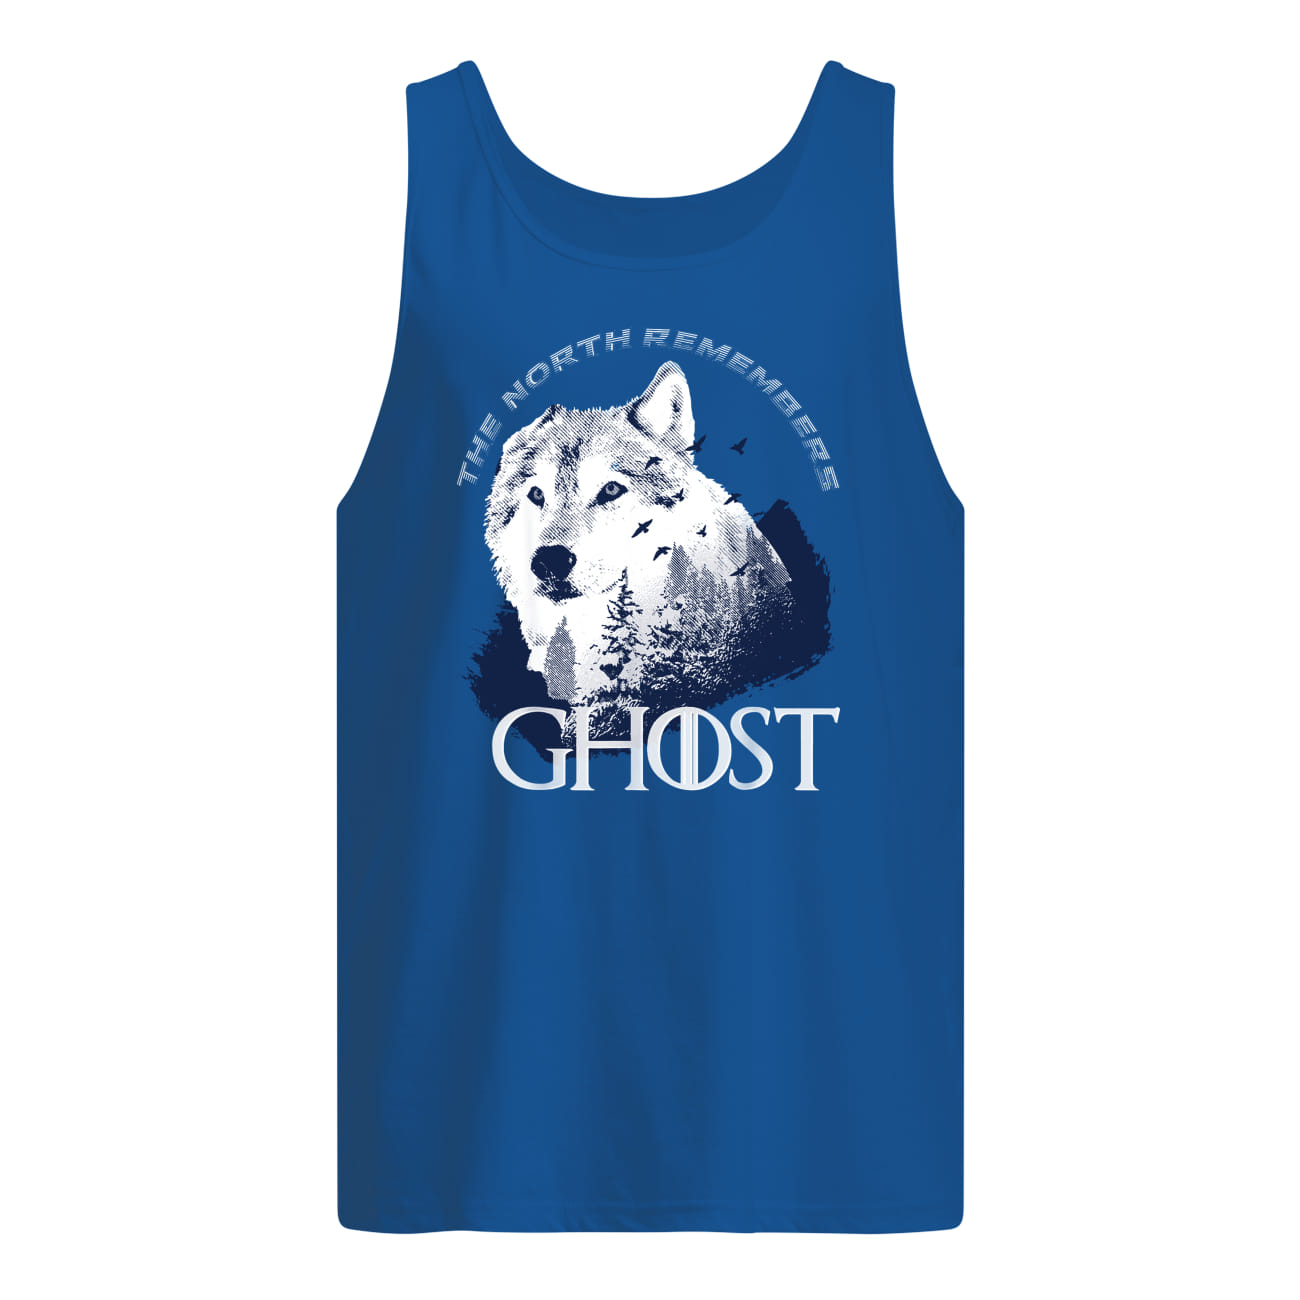 The north remember ghost game of thrones tank top